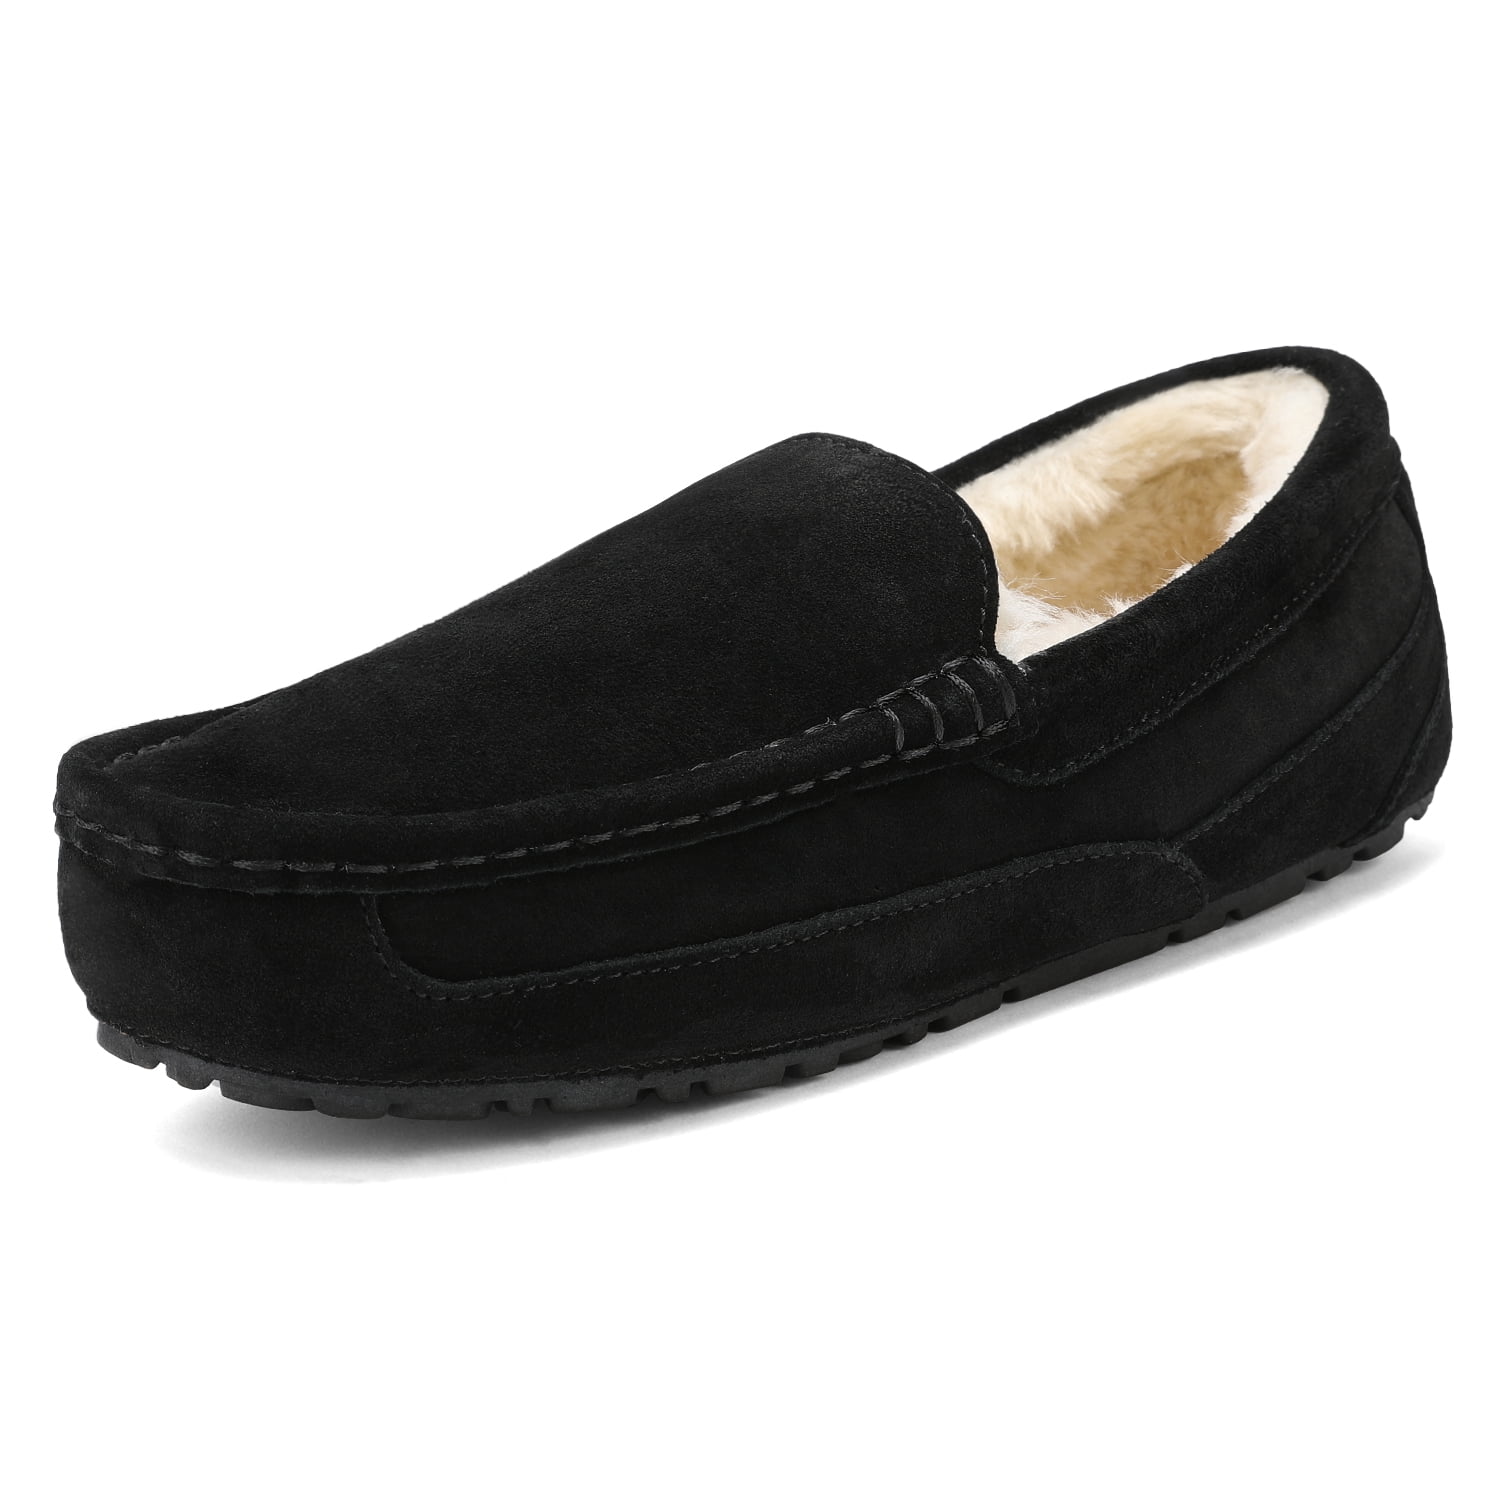 mens moccasin slippers size 9.5